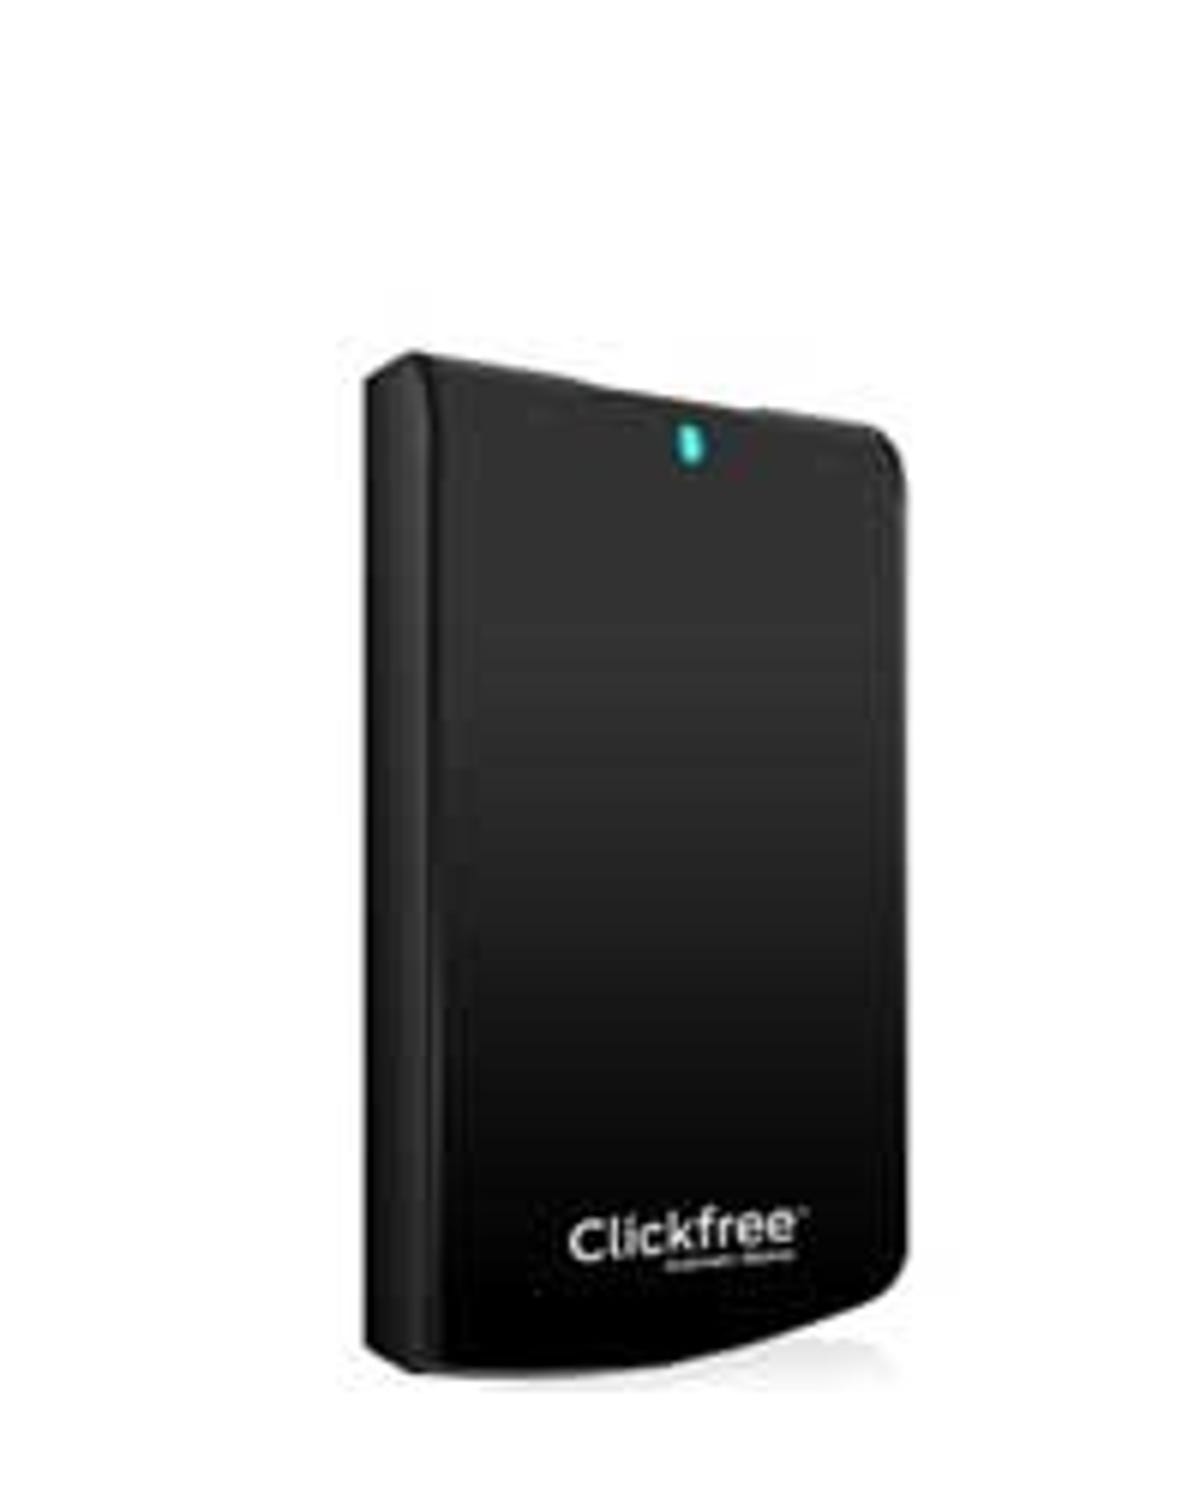 The new Clickfree C6 Easy Imaging portable drive.